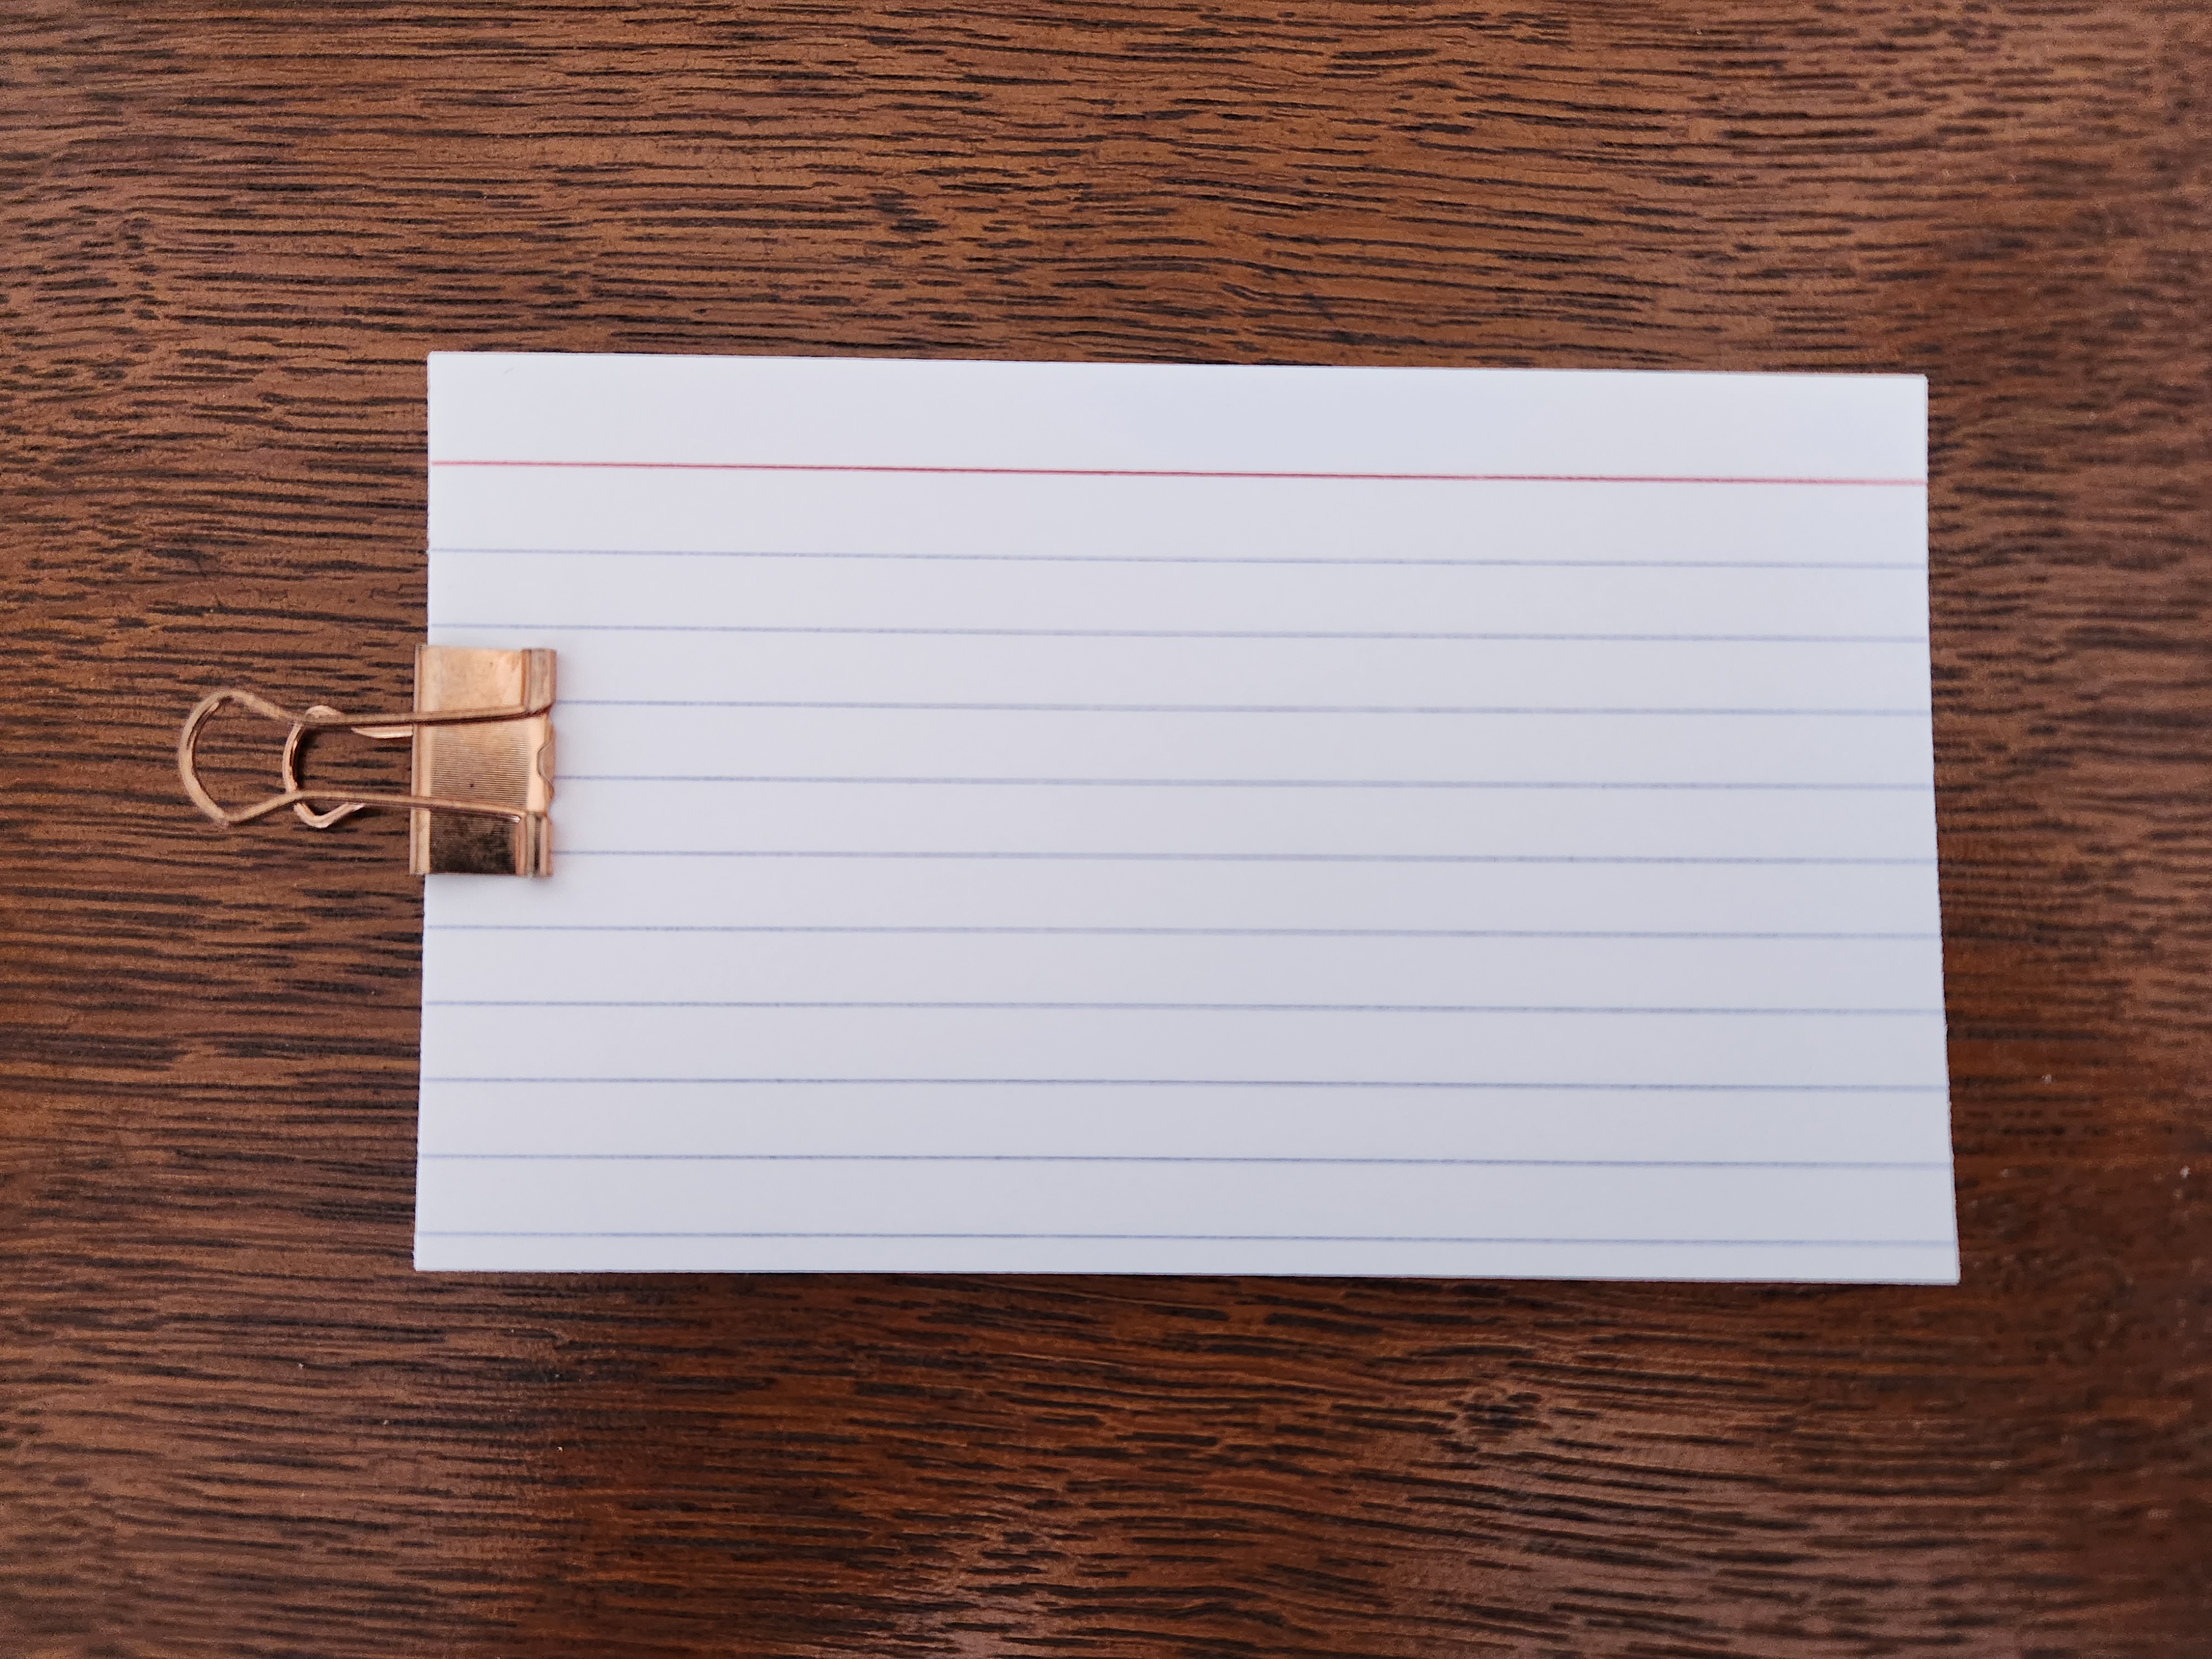 A stack of about 30 3 x 5 inch index cards with the traditional top red line and subsequent blue lines for writing all held together with a brass binder clip.